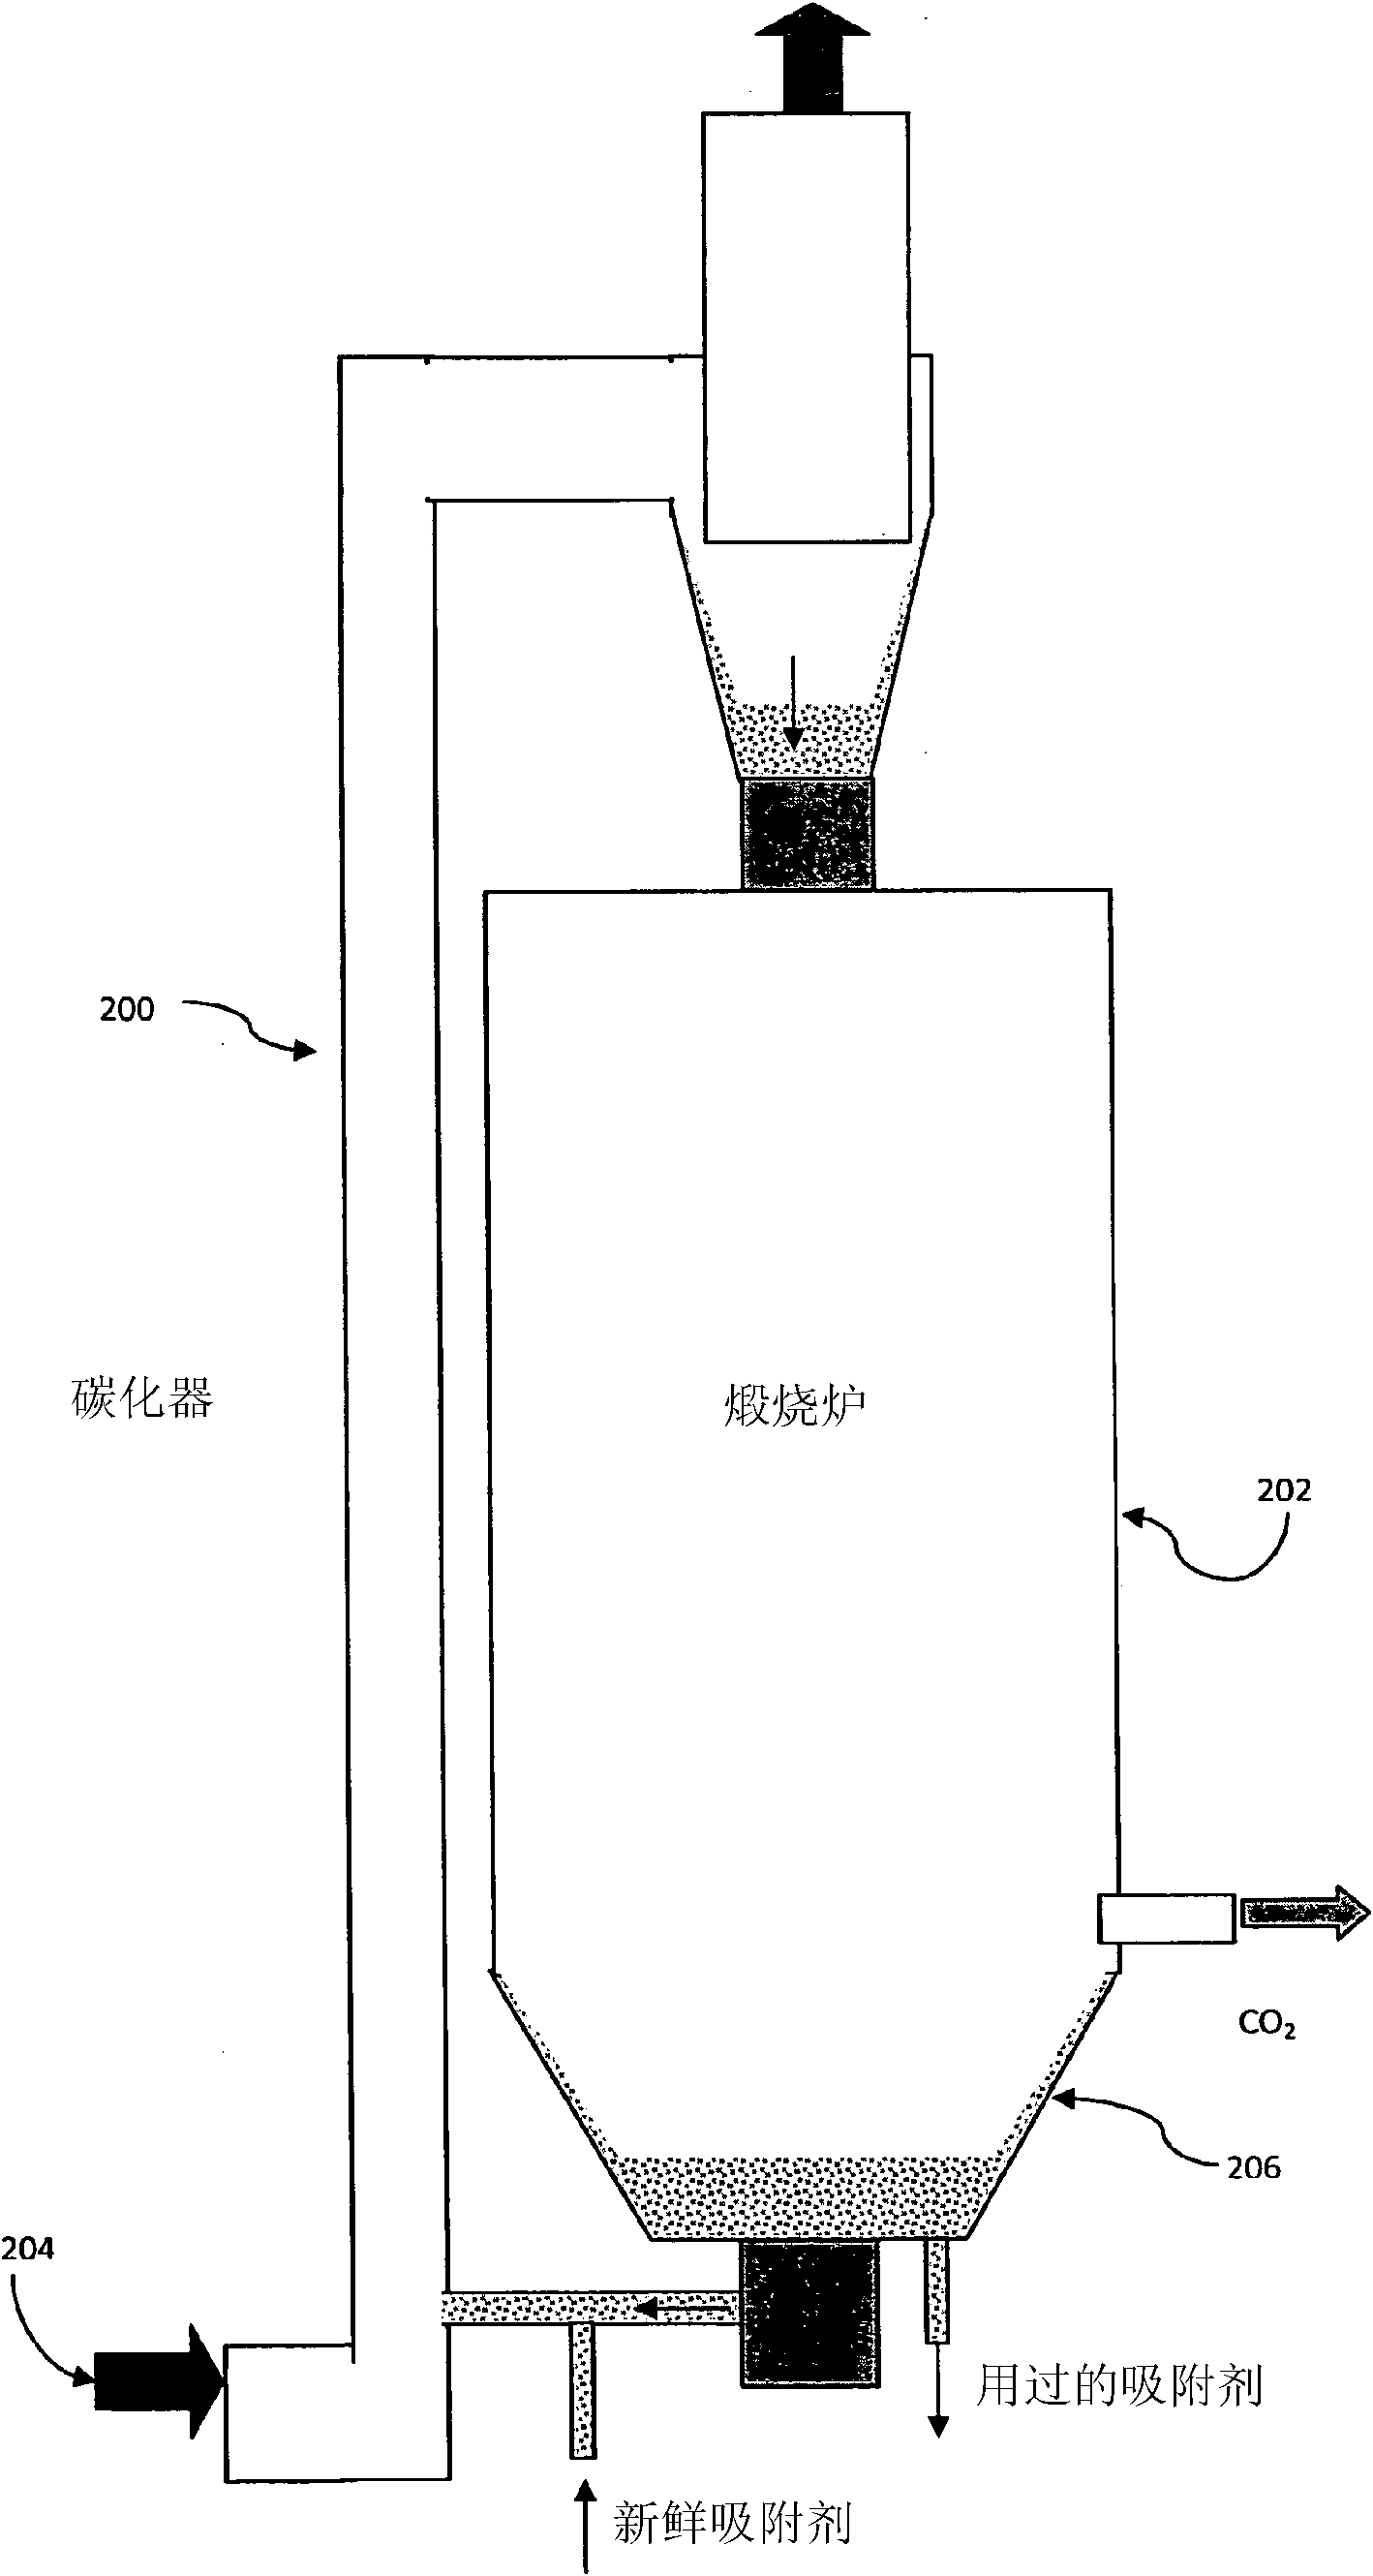 System and method for processing flue gas